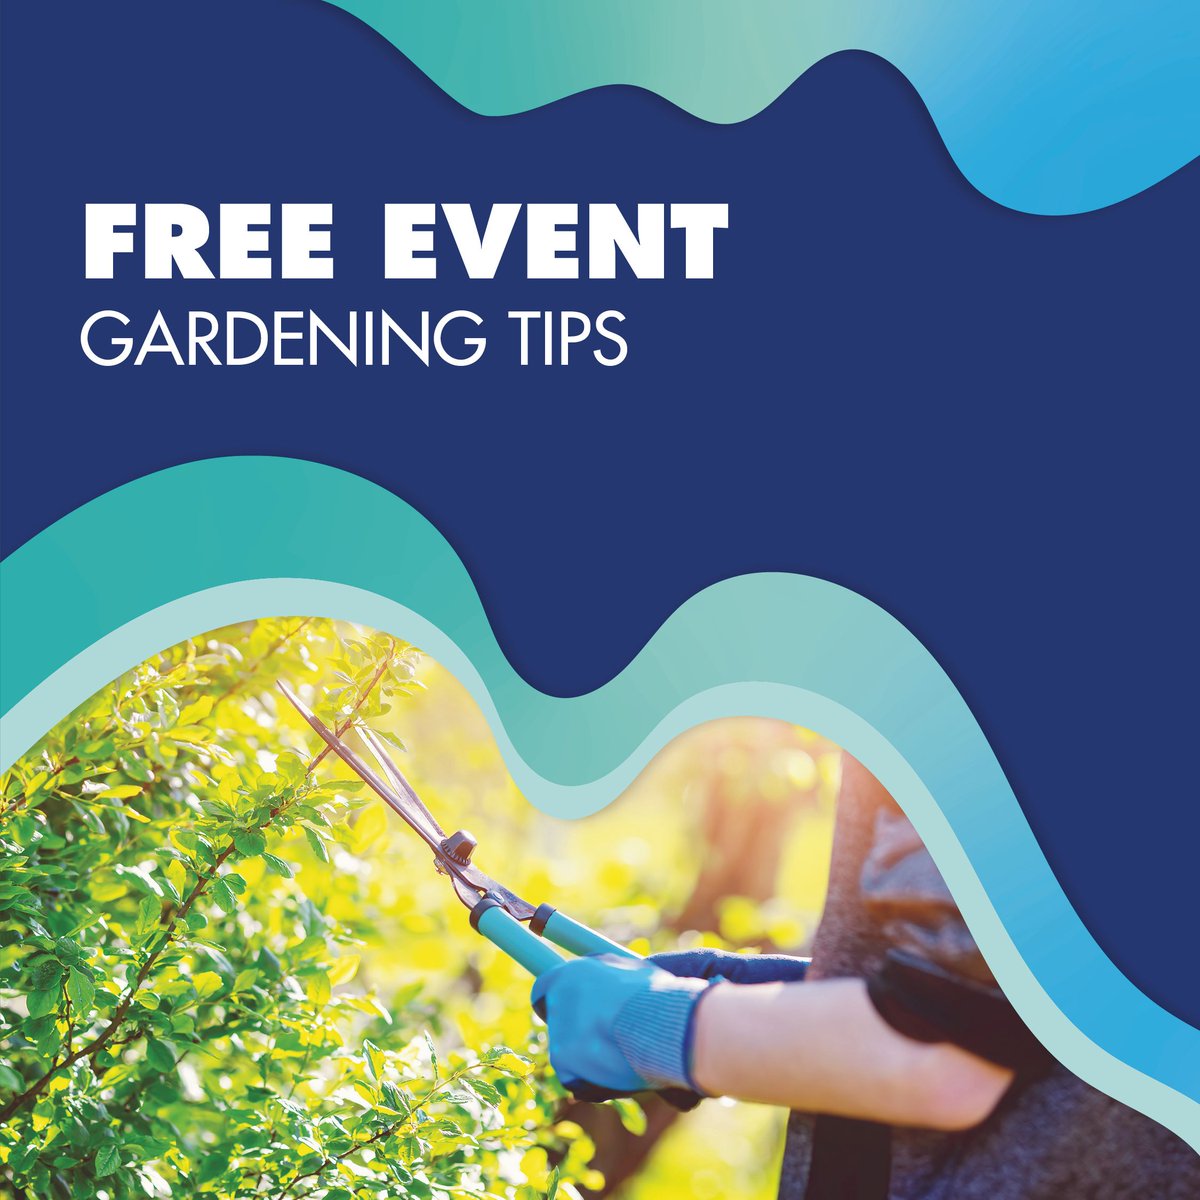 ❗️FREE EVENT: Peoria – The Best Desert Trees 🌲 In this class, a certified arborist will go over some great desert tree options that thrive in our climate and can fit the many needs of your landscape. @peoriaazcam 🗓️ April 20 @ 9:30 am - 11:00 am 📍buff.ly/3RXagcg